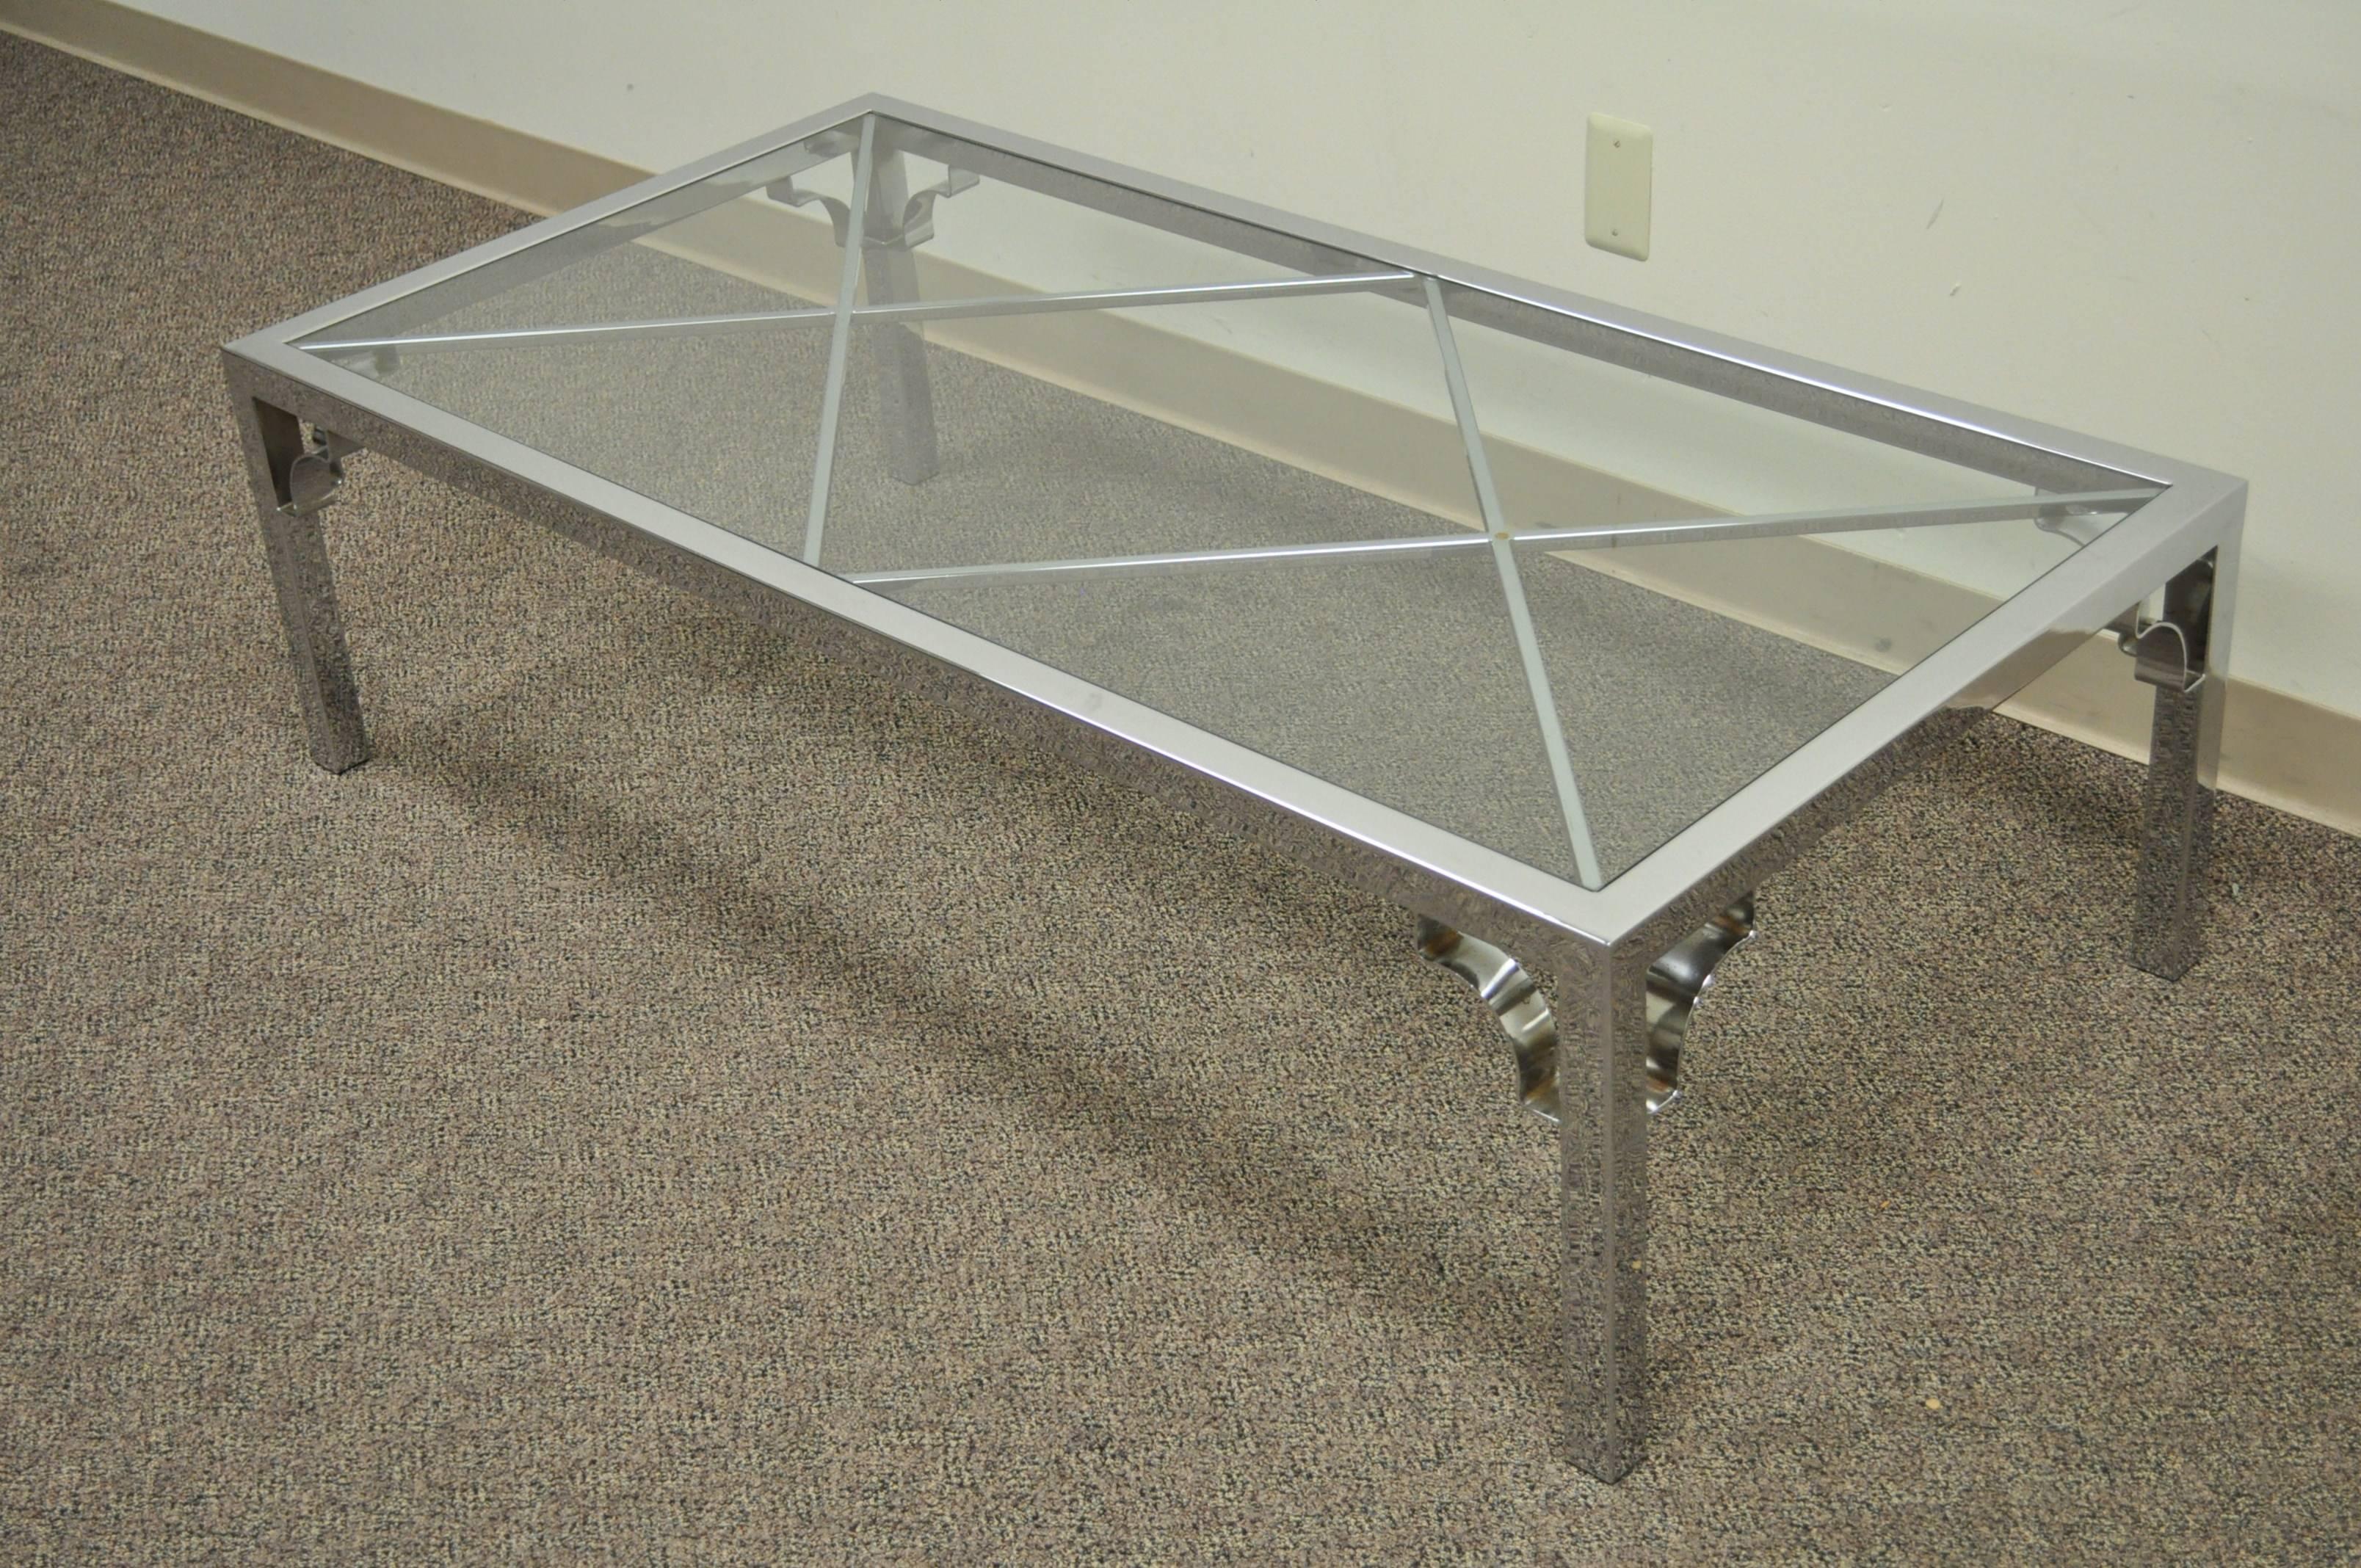 Wonderful vintage coffee table with polished chrome frame and double X-forms under the inset glass top. This table features polished seamless joints throughout for a more clean overall aesthetic. Each leg has decorative arched detailing at the